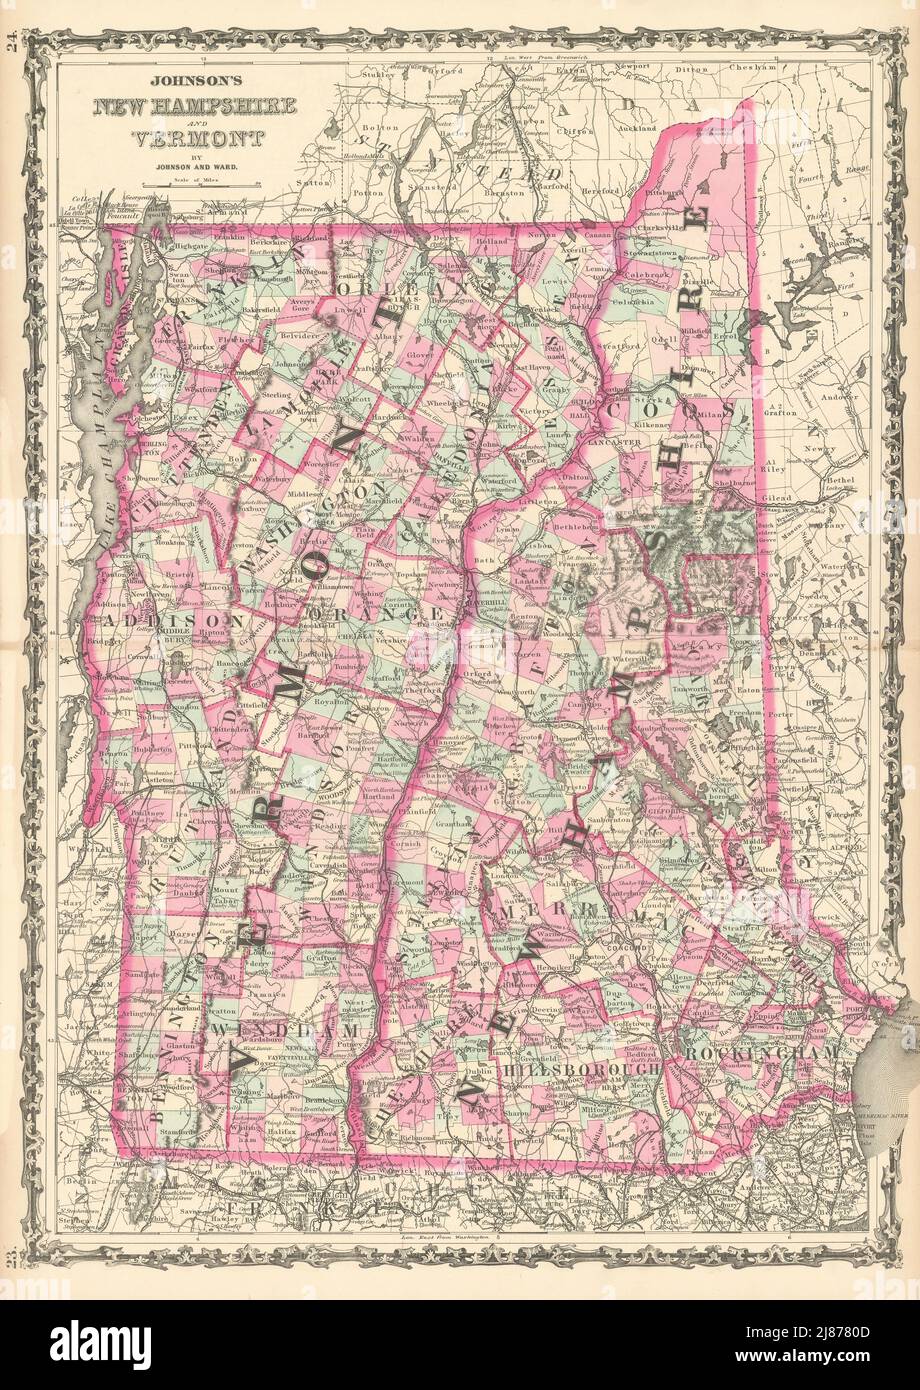 Johnson's New Hampshire & Vermont. US State map showing counties 1863 old Stock Photo